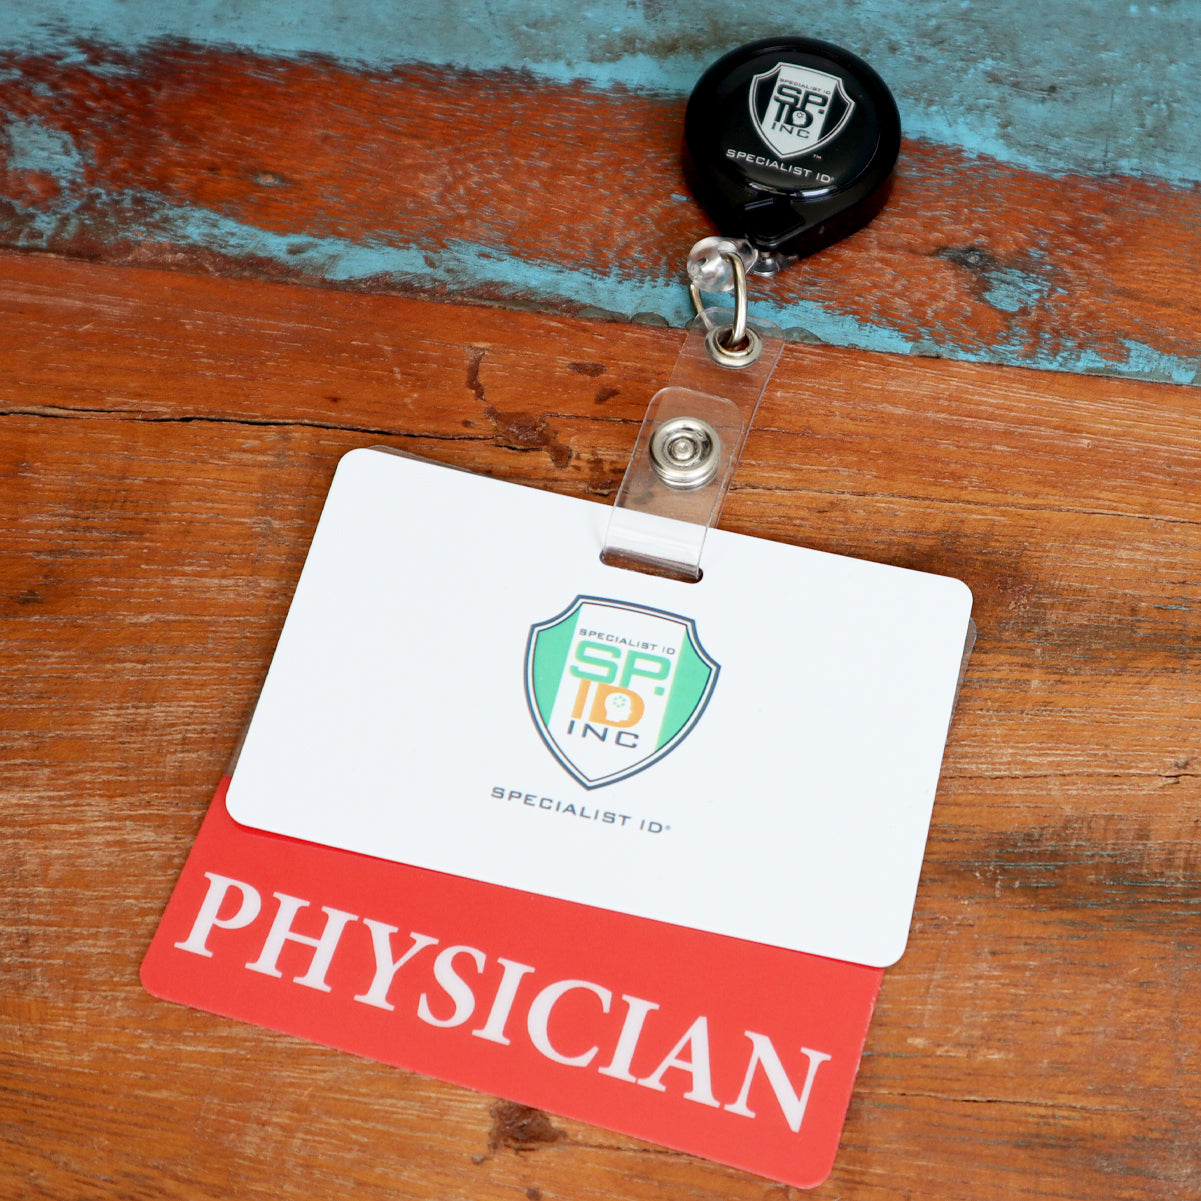 A plastic badge with a retractable holder labeled "PHYSICIAN" is displayed on a wooden surface. The Clear PHYSICIAN Badge Buddy - Horizontal ID Badge Backer for Physicians - Double Sided Print features the logo of Specialist ID with green, yellow, and white colors.